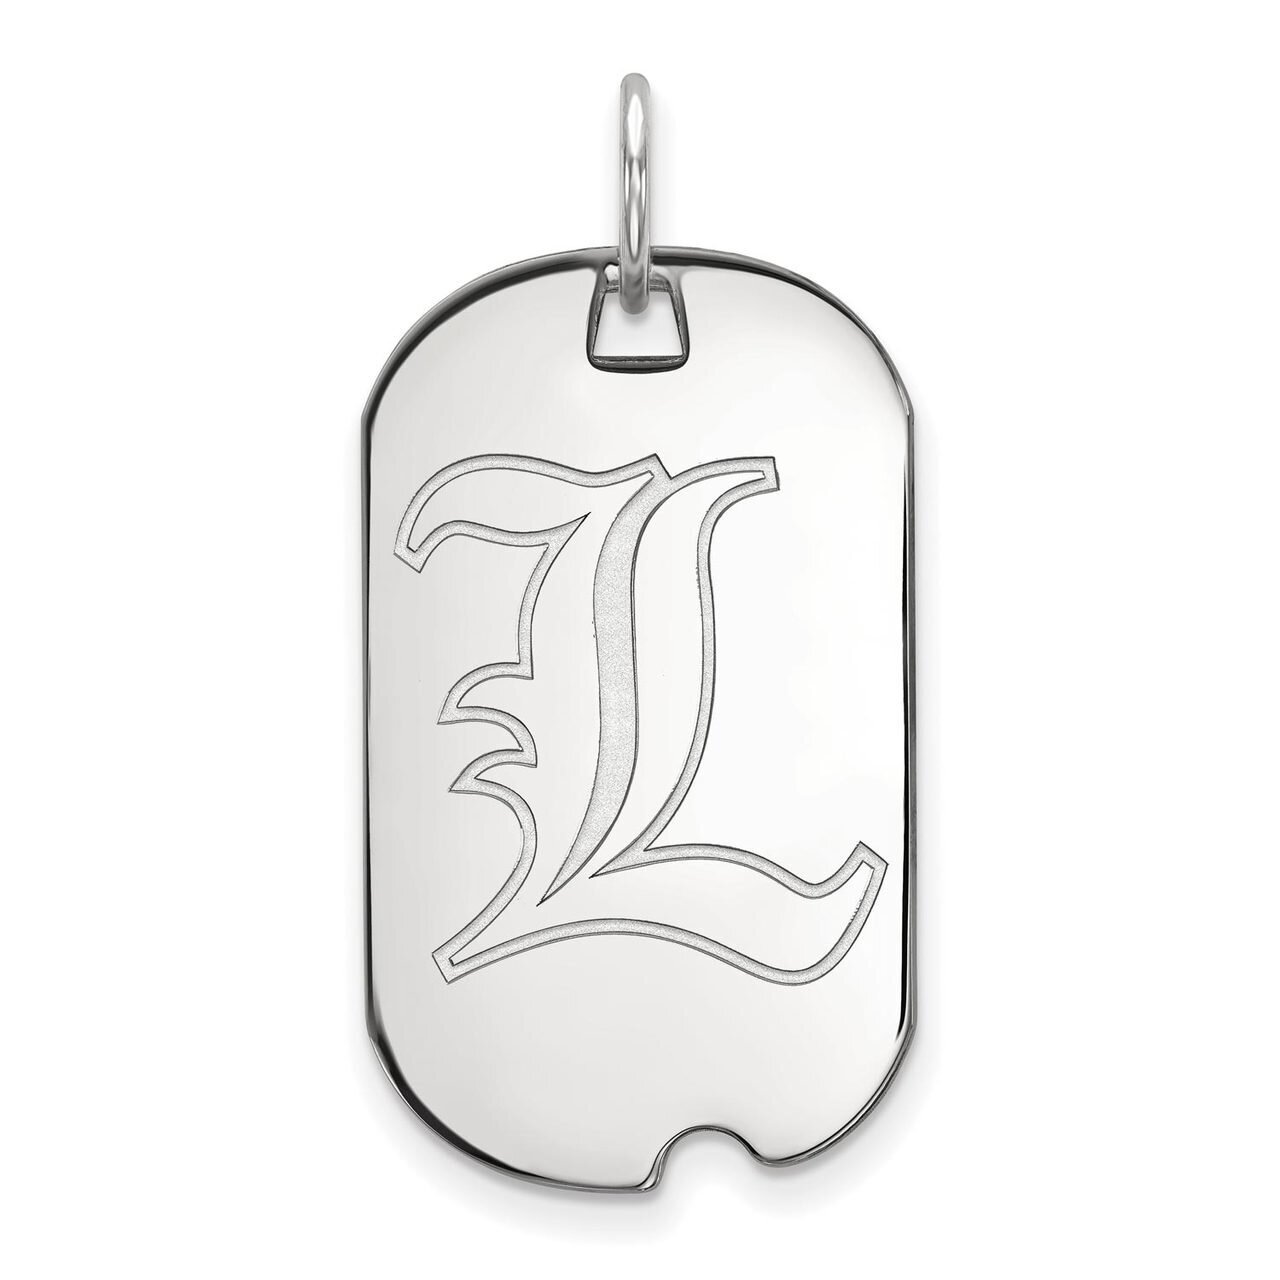 University of Louisville Small Dog Tag 10k White Gold 1W021UL